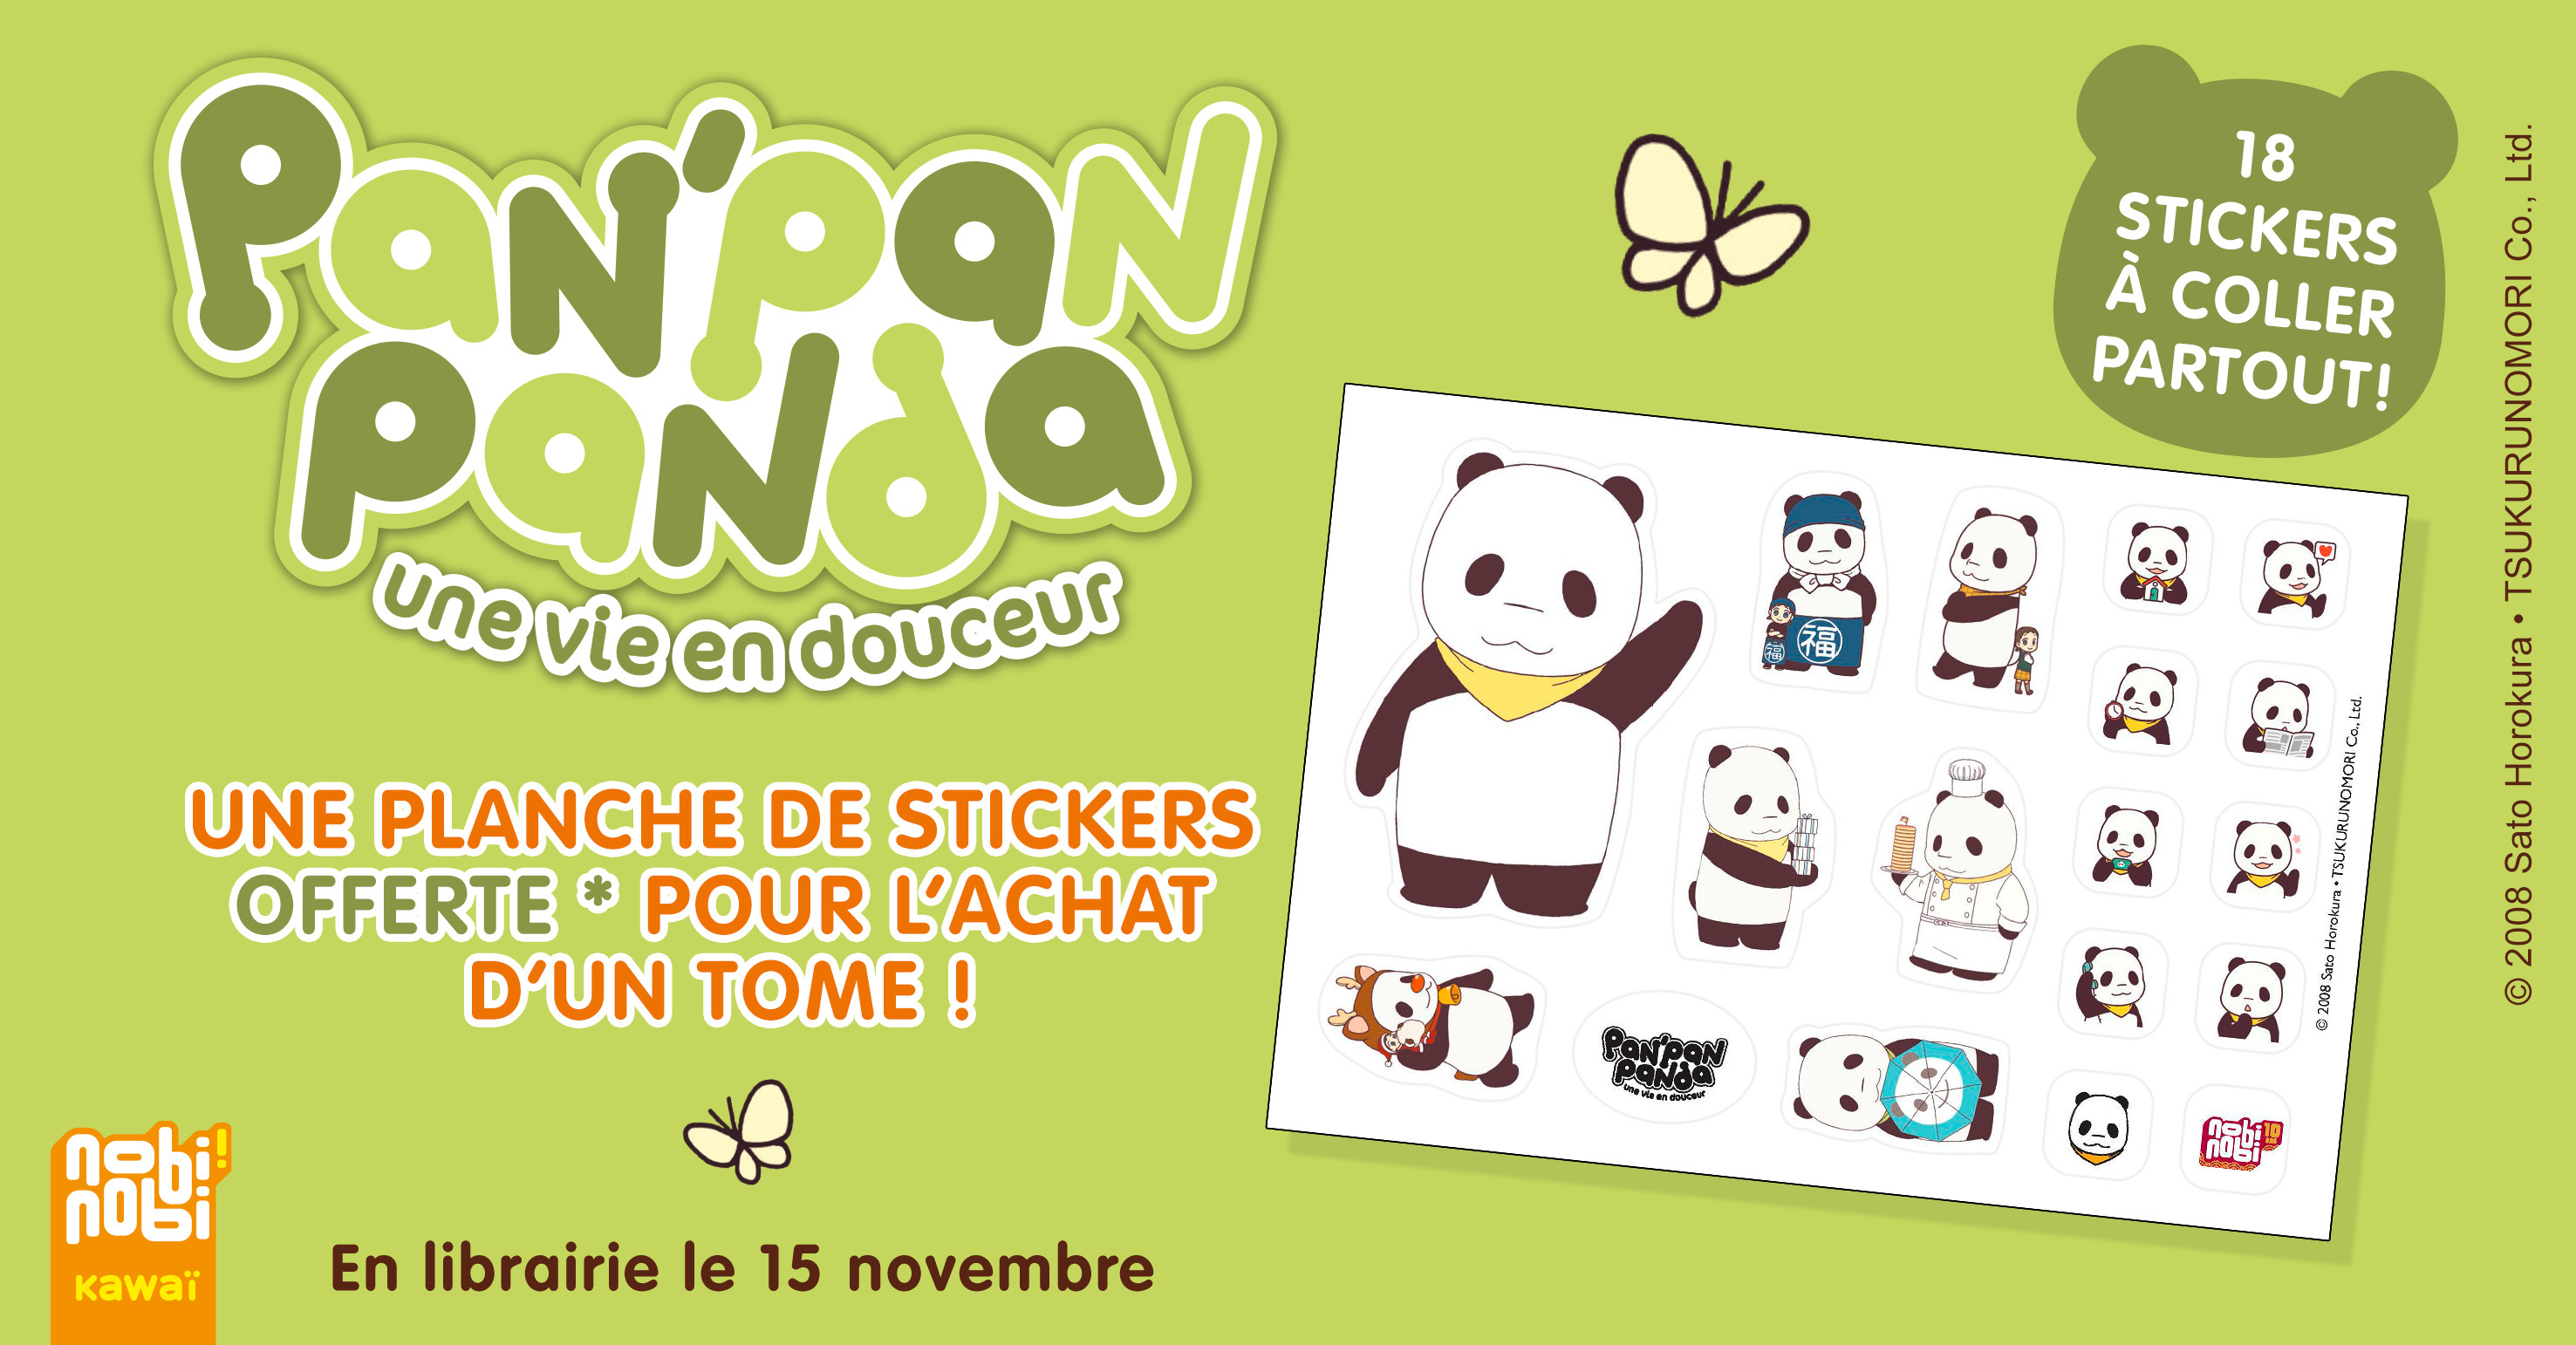 Stickers promotionnels Pan